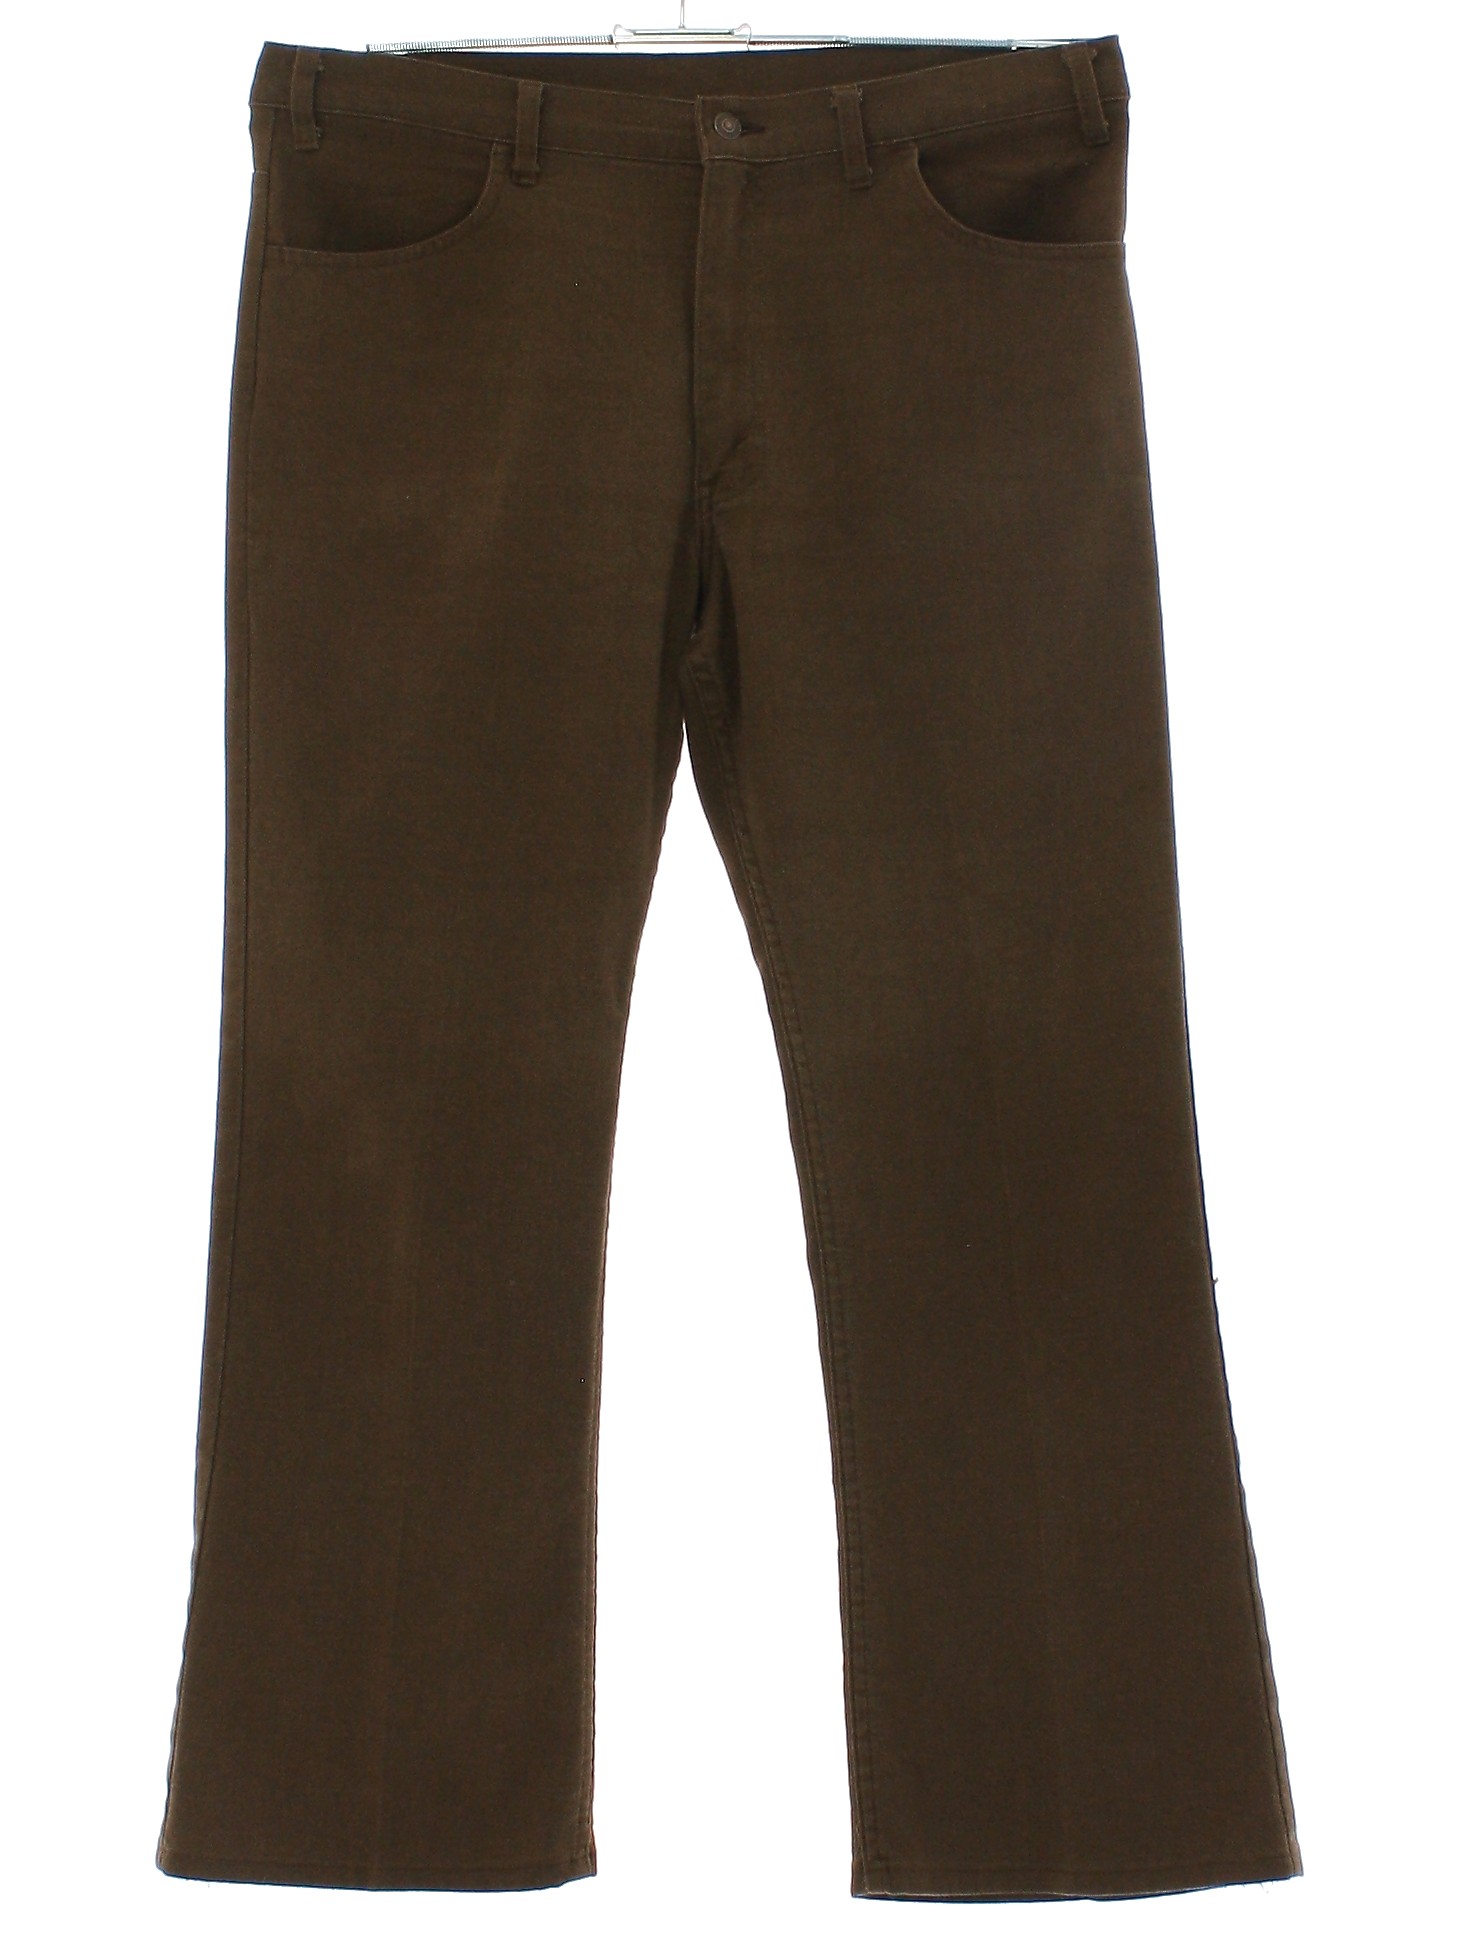 Seventies Vintage Pants: 70s -Levis- Mens brown solid colored polyester ...